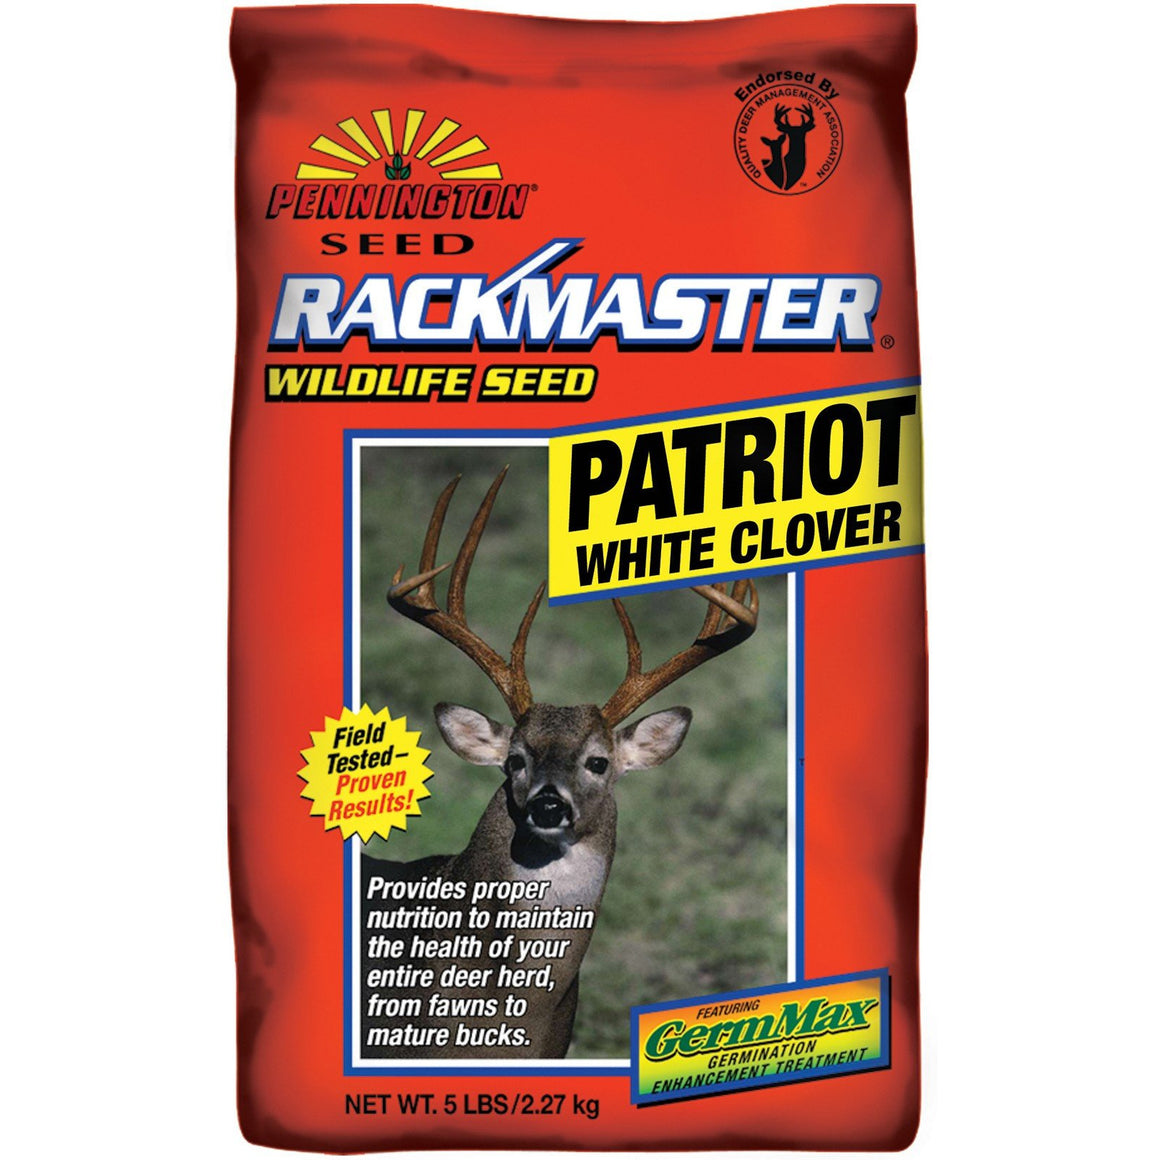 RackMaster Patriot White Clover Seed - 5 Lbs. - Seed World